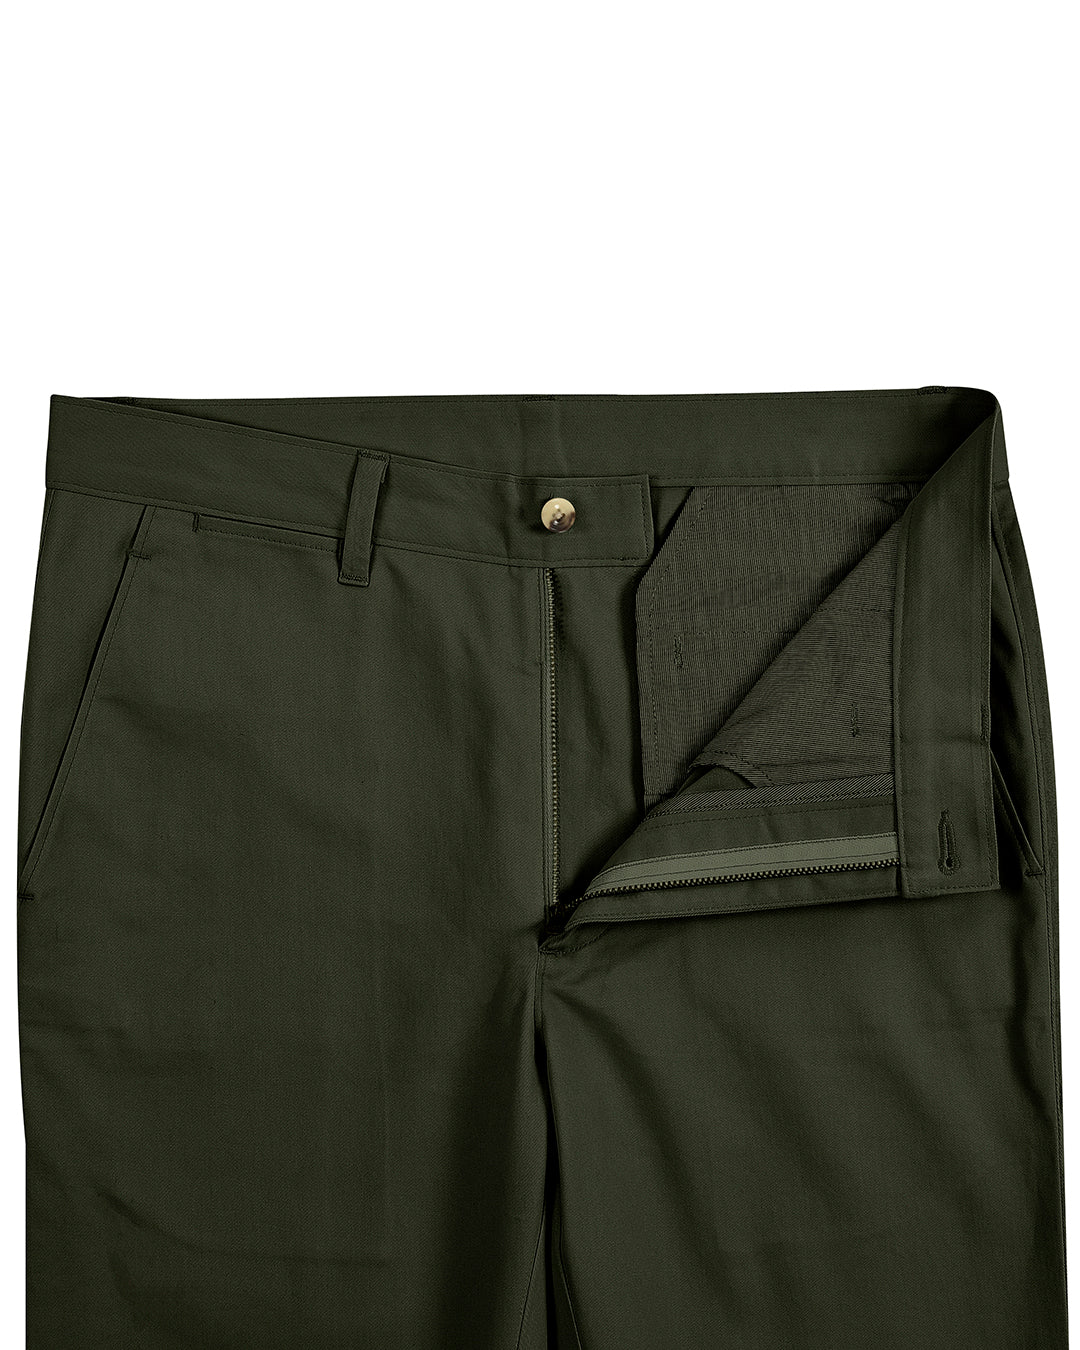 Open front view of custom Genoa Chino pants for men by Luxire in olive green